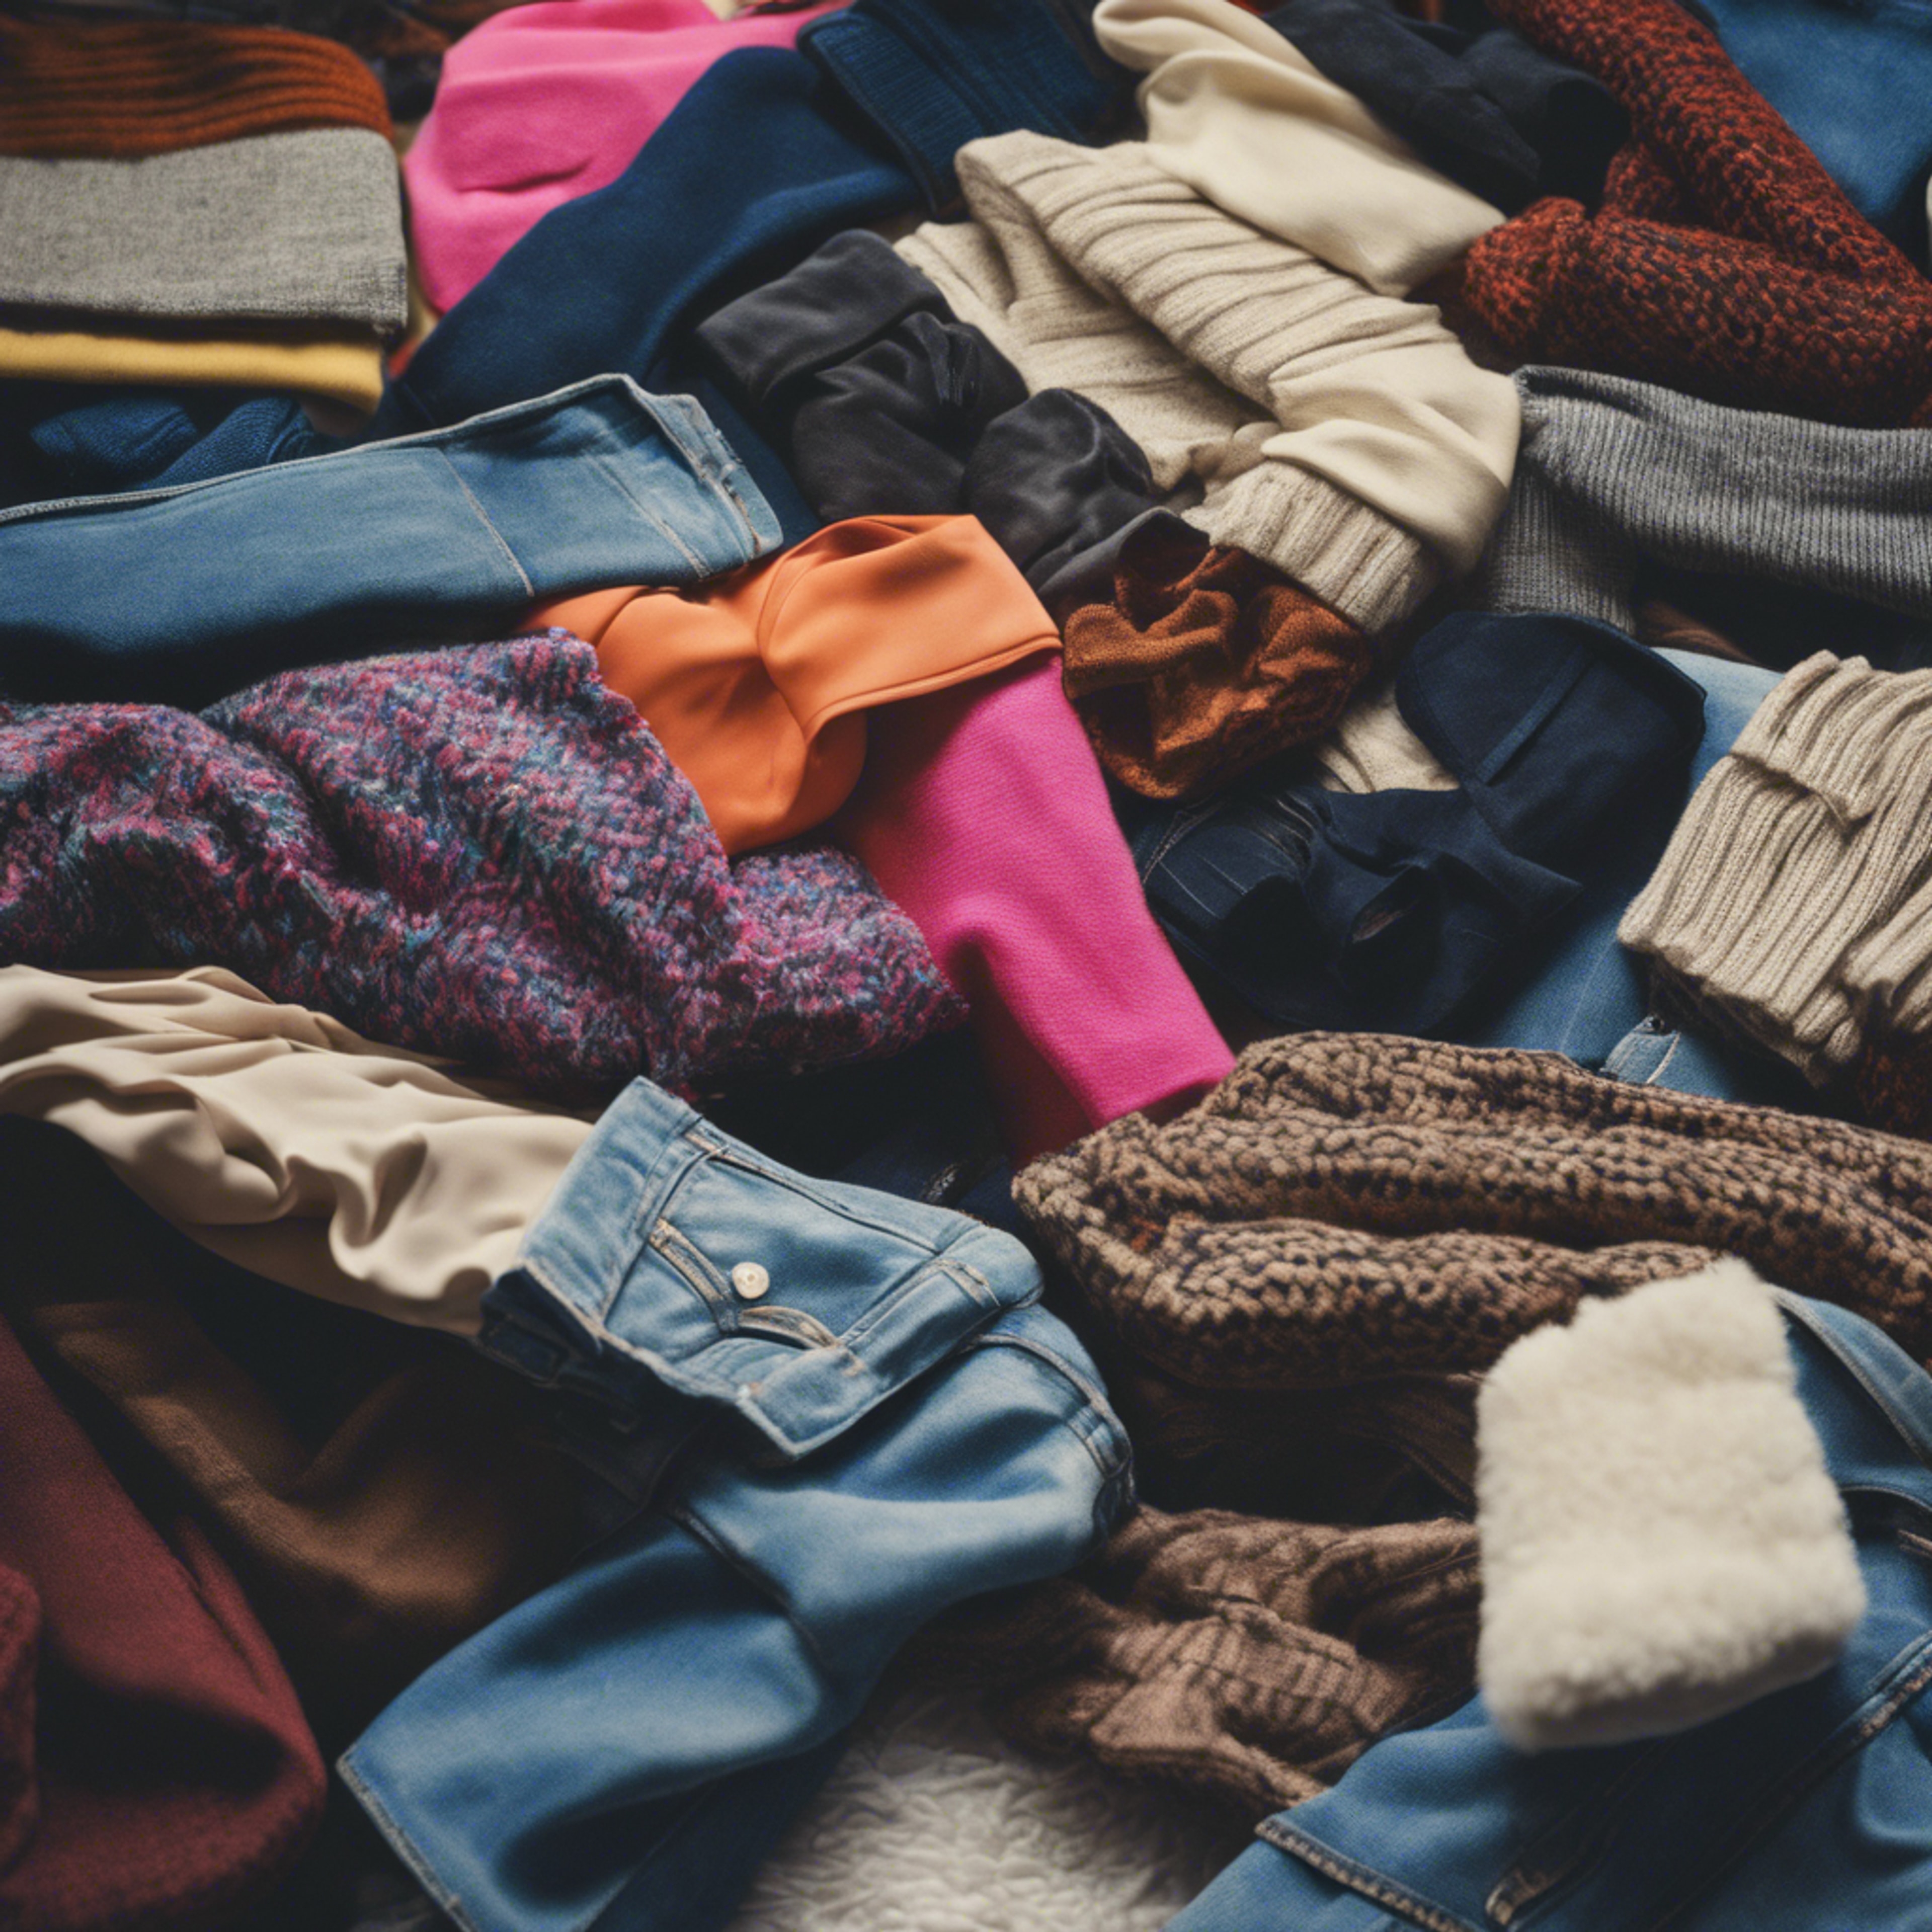 A pile of iconic 80s fashions such as leg warmers, oversized blazers, and high-waisted jeans. Валлпапер[dbd69f645b7844d6a4c4]